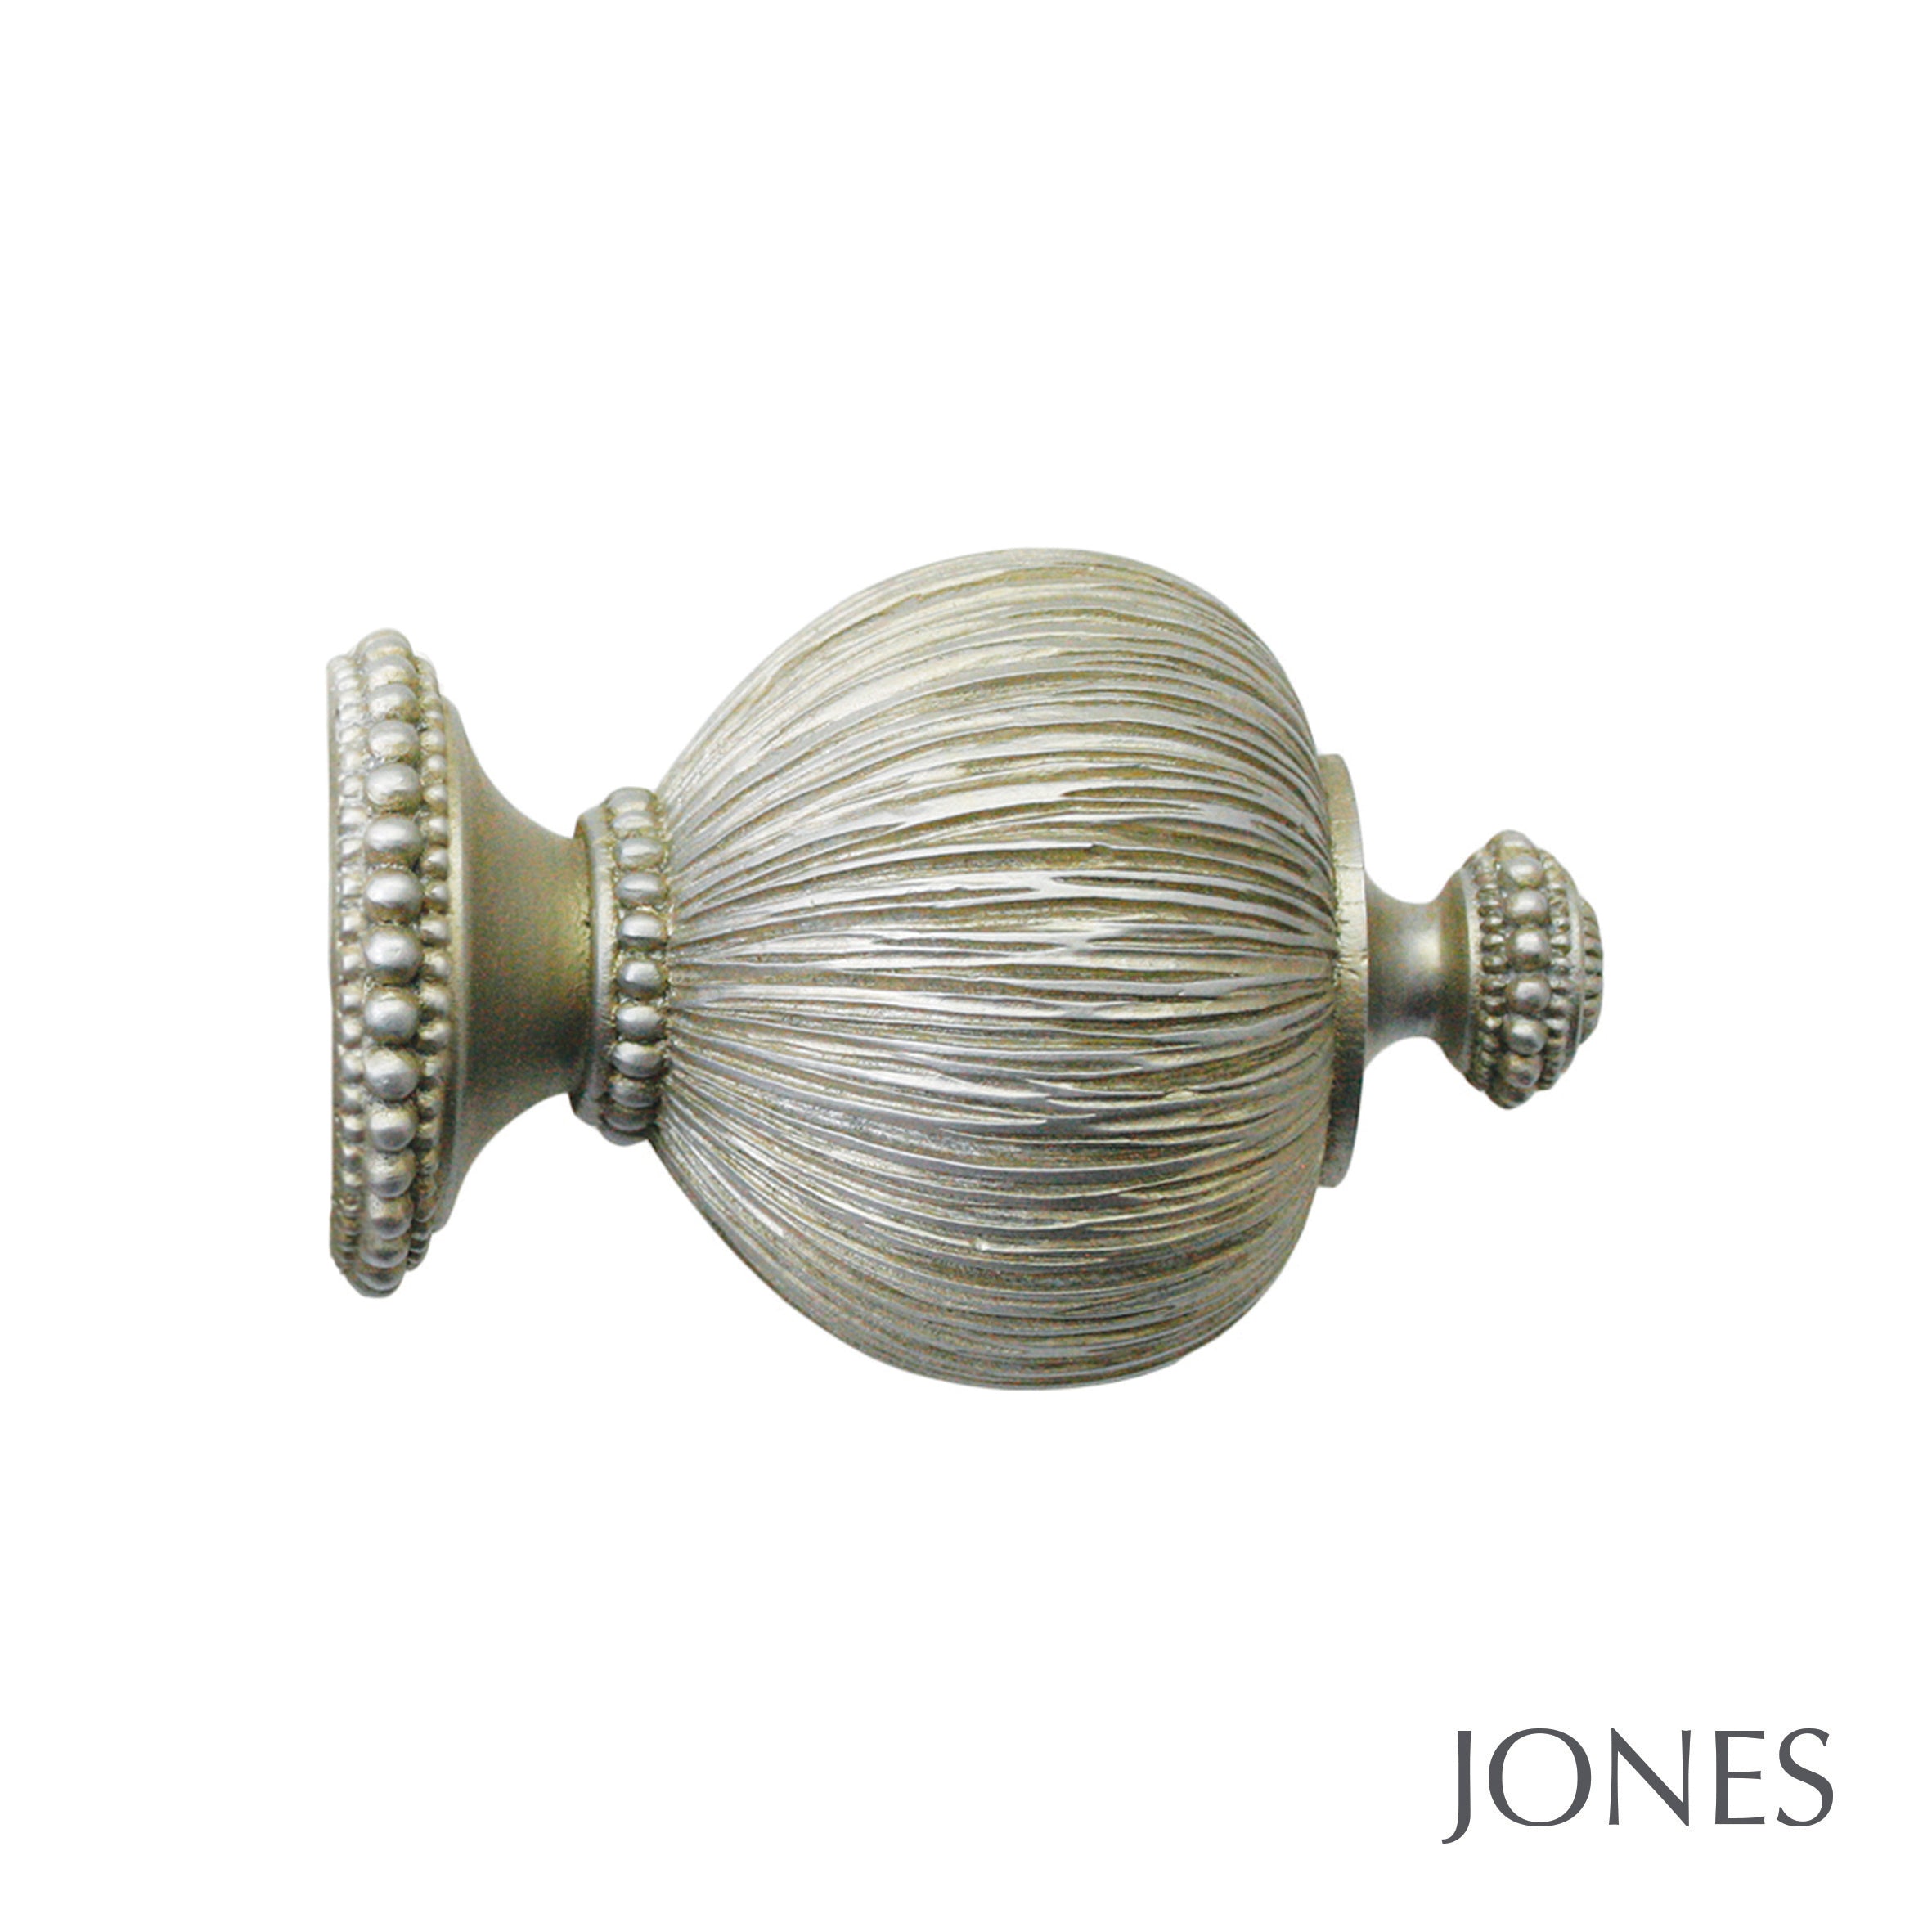 Jones Interiors Florentine Pleated Finial Curtain Pole Set in Champagne Silver